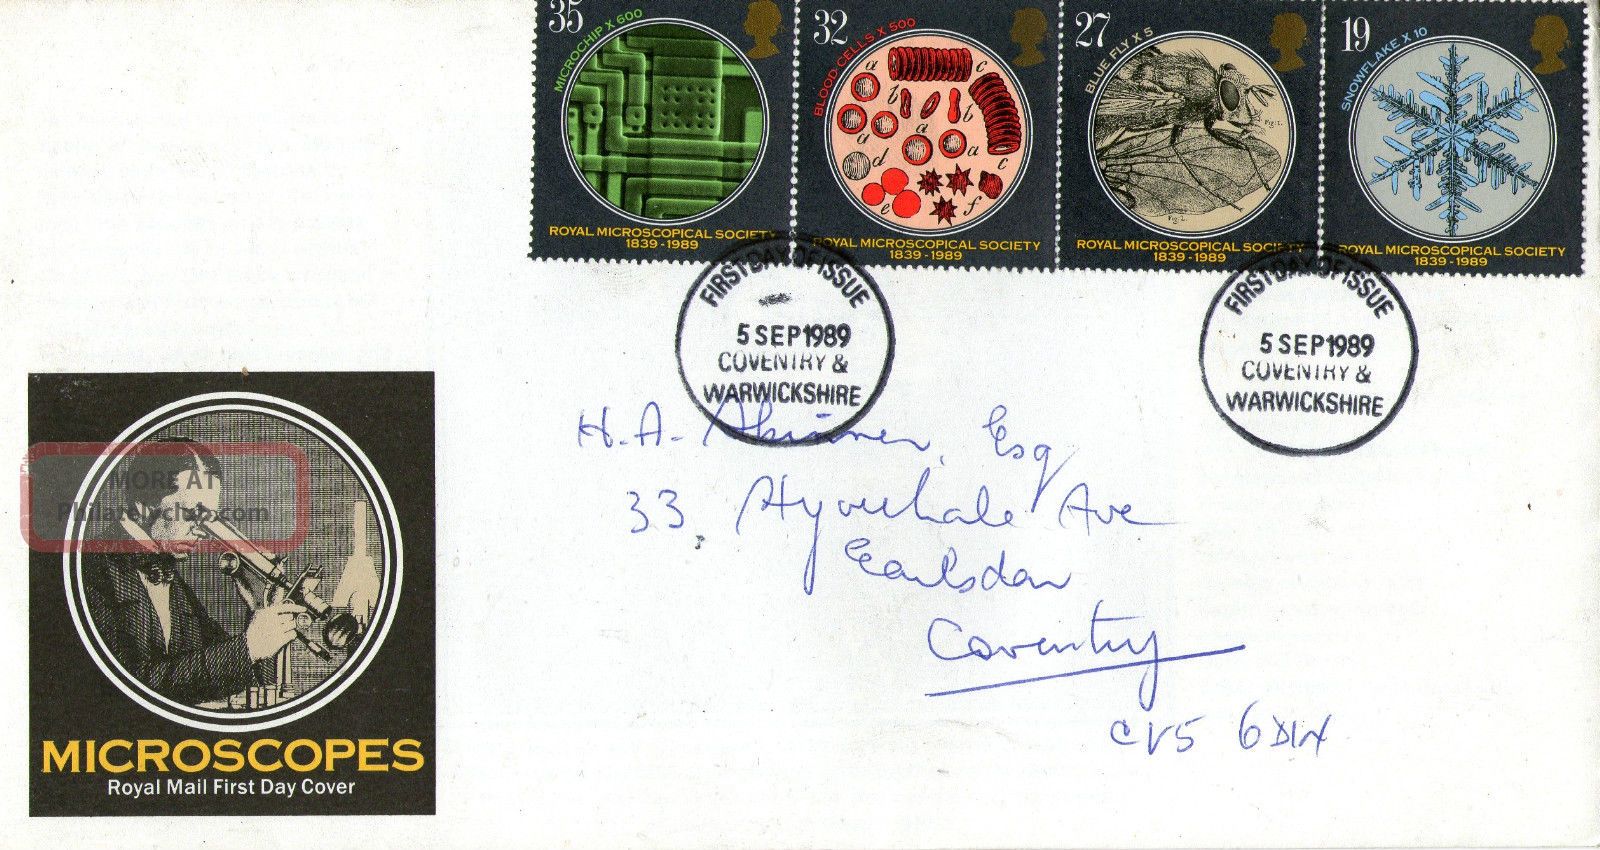 5 September 1989 Microscopes Royal Mail First Day Cover Coventry Fdi Organizations photo